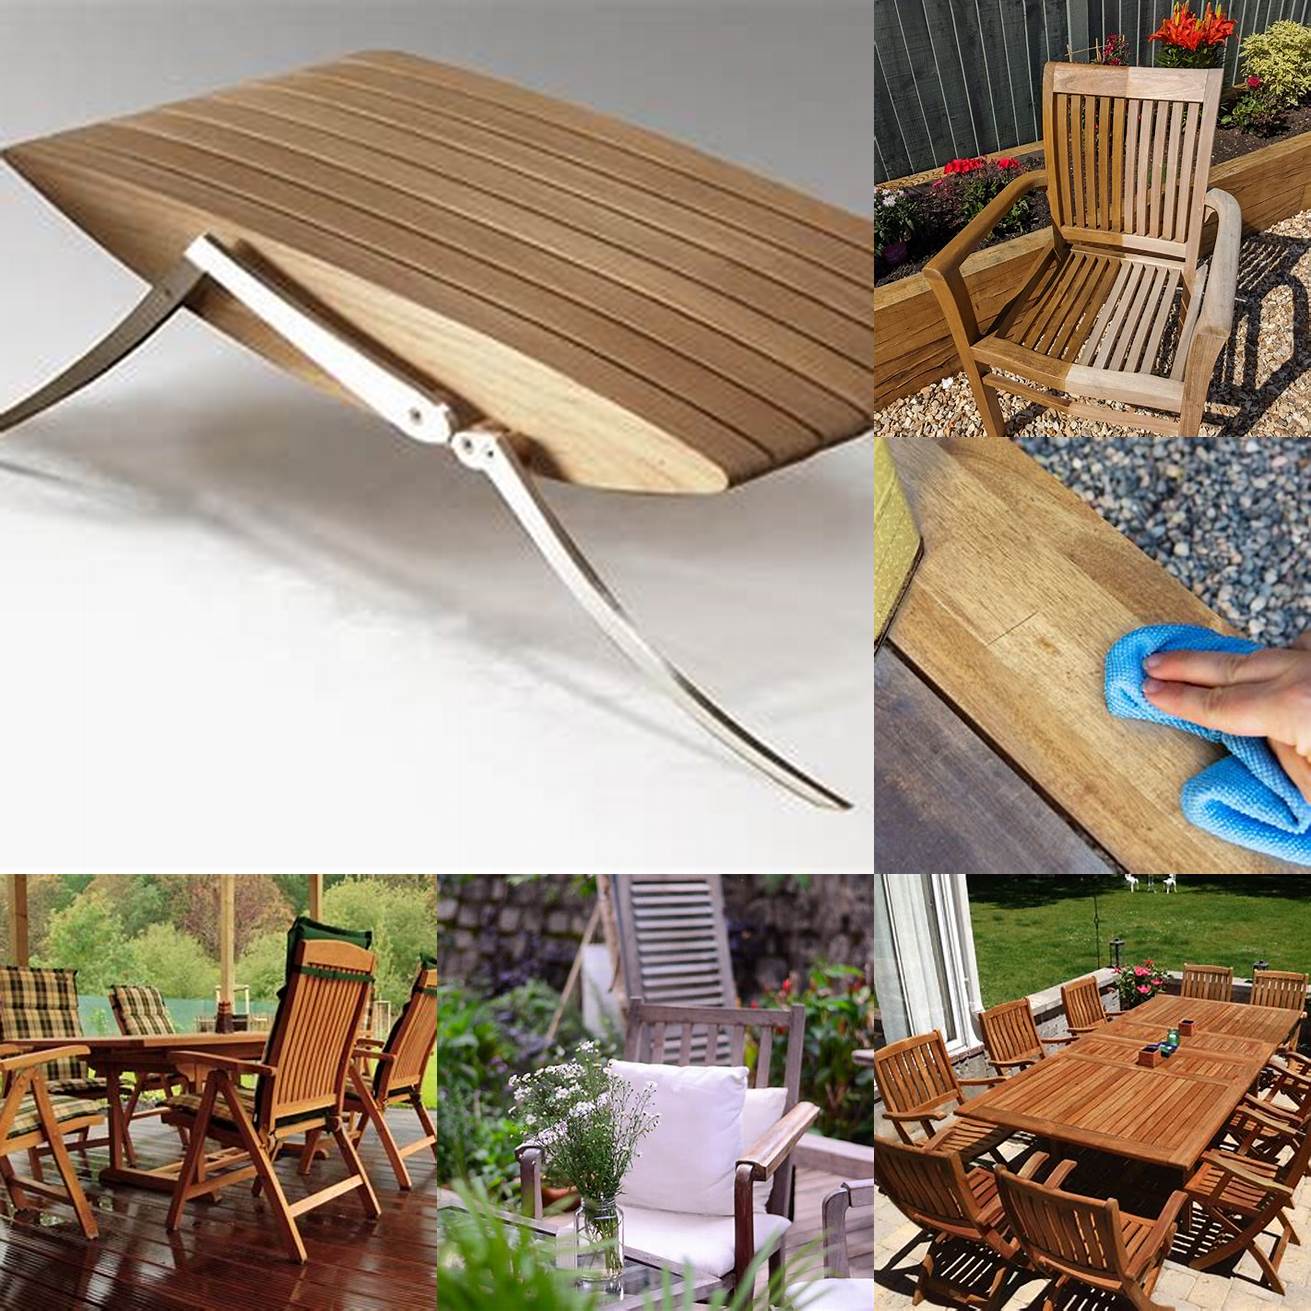 Teak Furniture With Insect Damage Protection